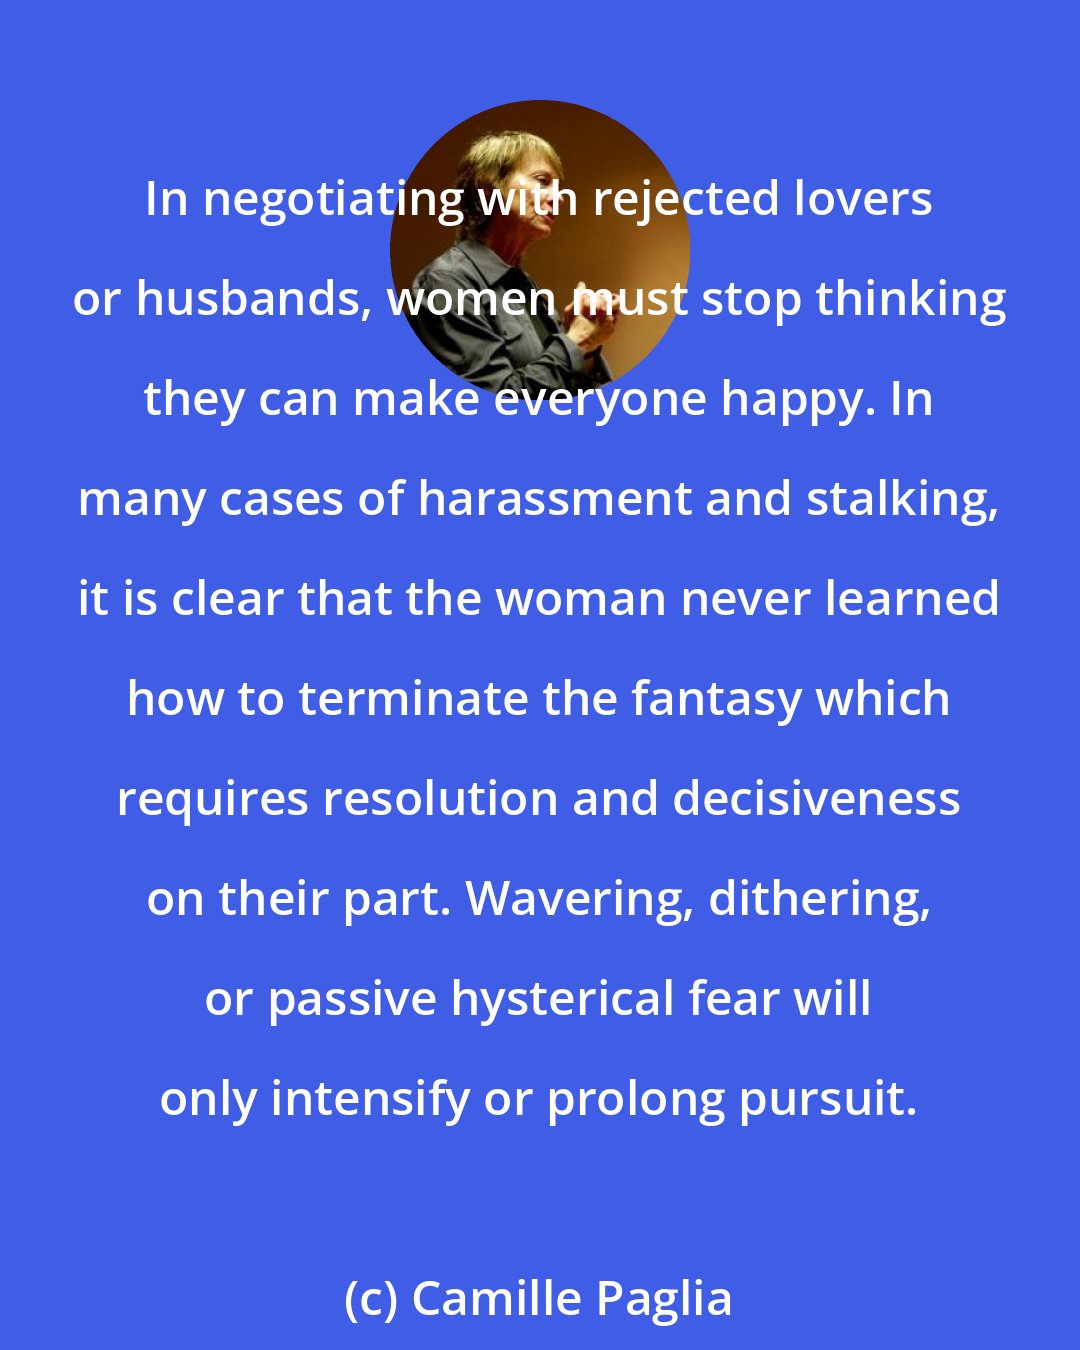 Camille Paglia: In negotiating with rejected lovers or husbands, women must stop thinking they can make everyone happy. In many cases of harassment and stalking, it is clear that the woman never learned how to terminate the fantasy which requires resolution and decisiveness on their part. Wavering, dithering, or passive hysterical fear will only intensify or prolong pursuit.